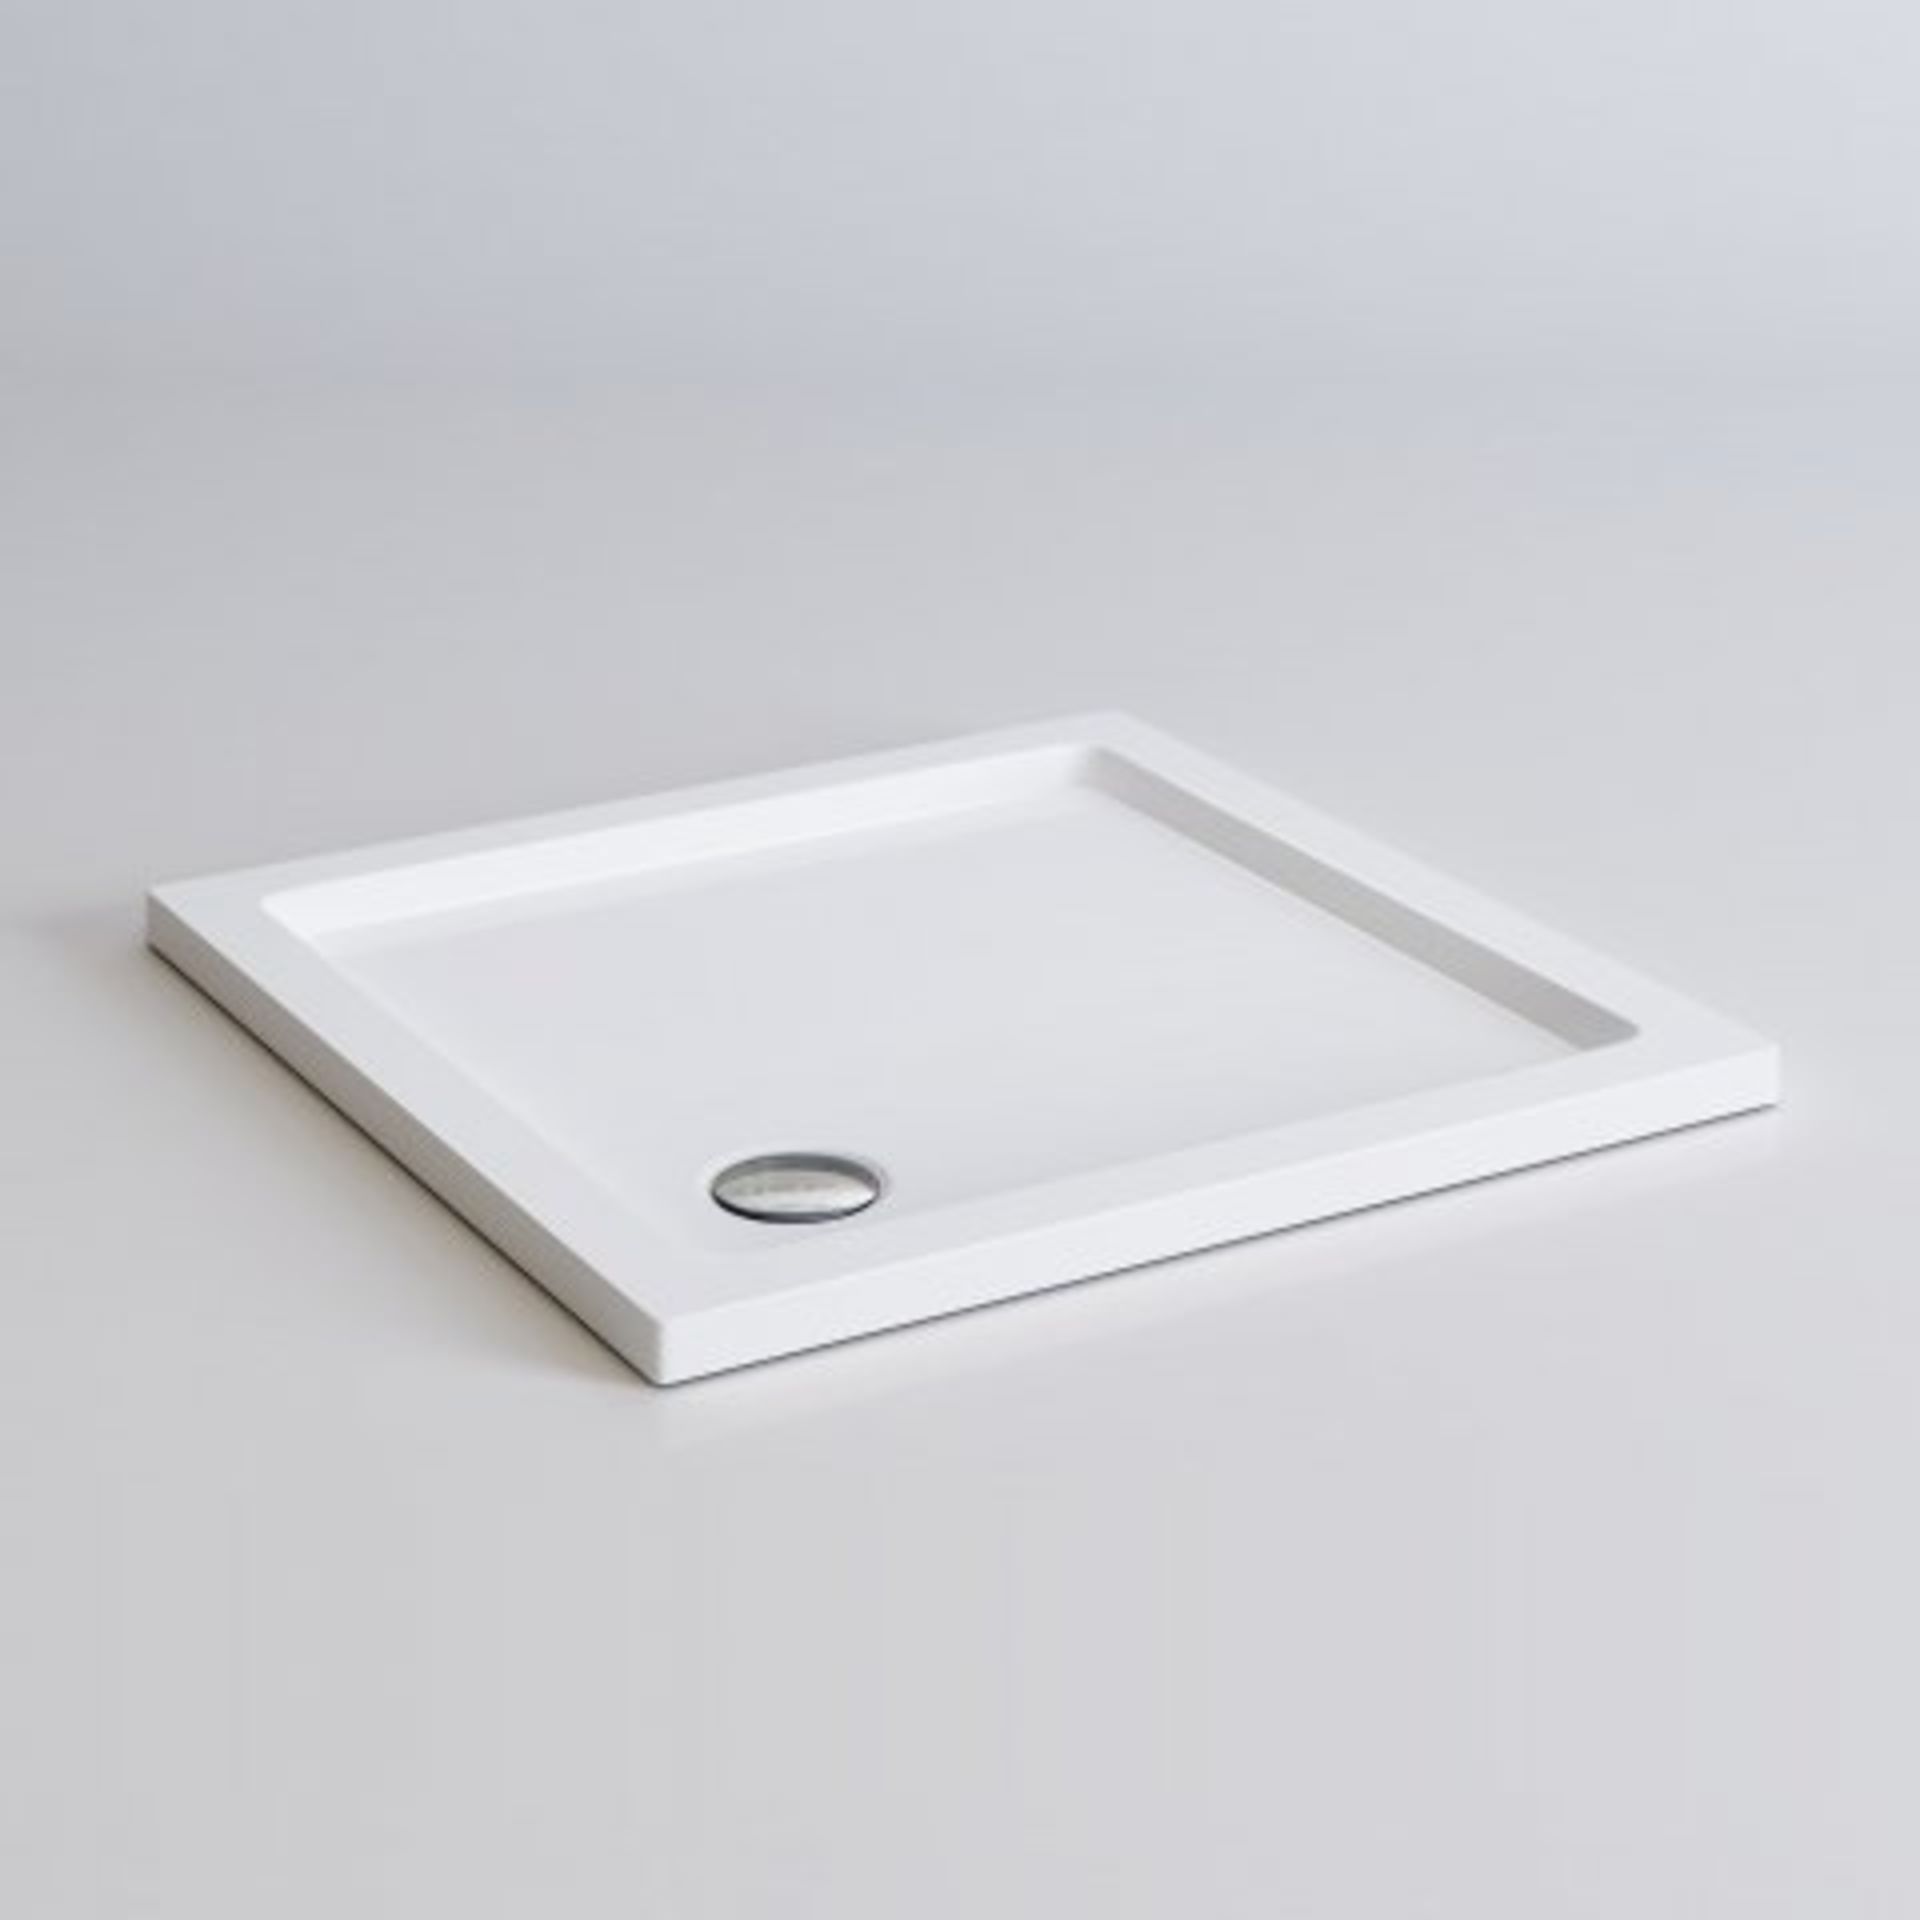 (H52) 900x900mm Square Lightweight PU Shower Tray. RRP £124.99. Strong & Slimline low profile